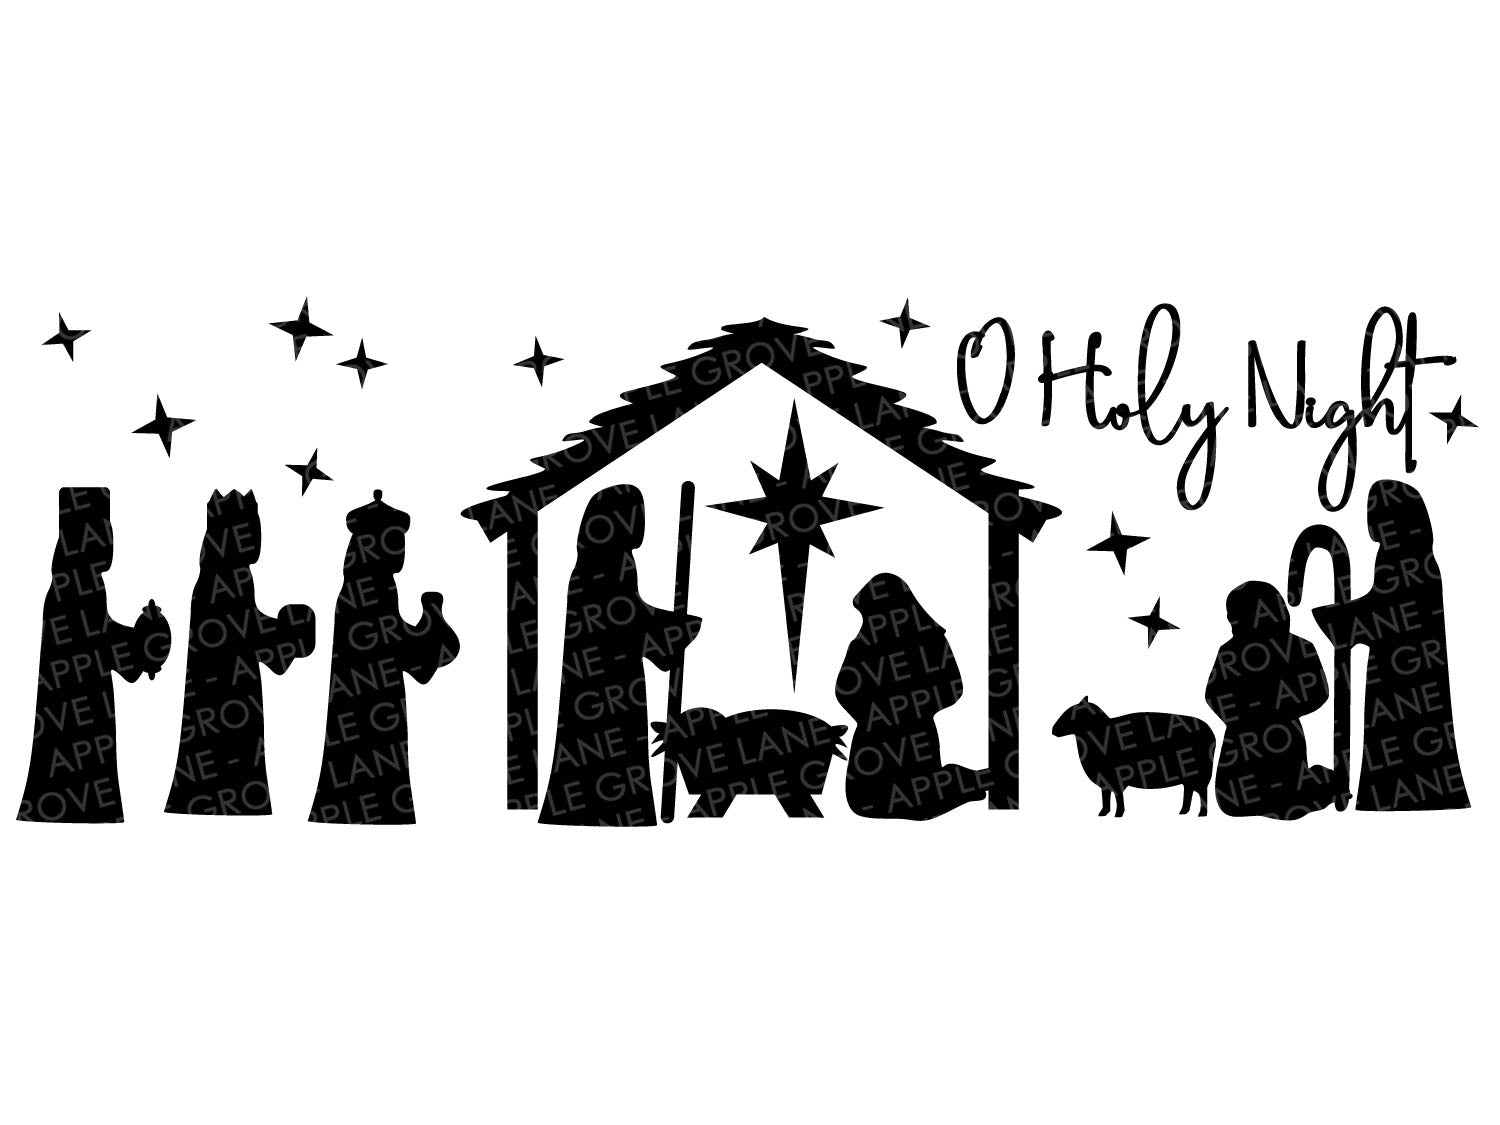 Download 24 Christmas Nativity Christmas Svg Files For Crafters 118704 Cut Files Design Bundles 10 Nativity Svg Files Images PSD Mockup Templates